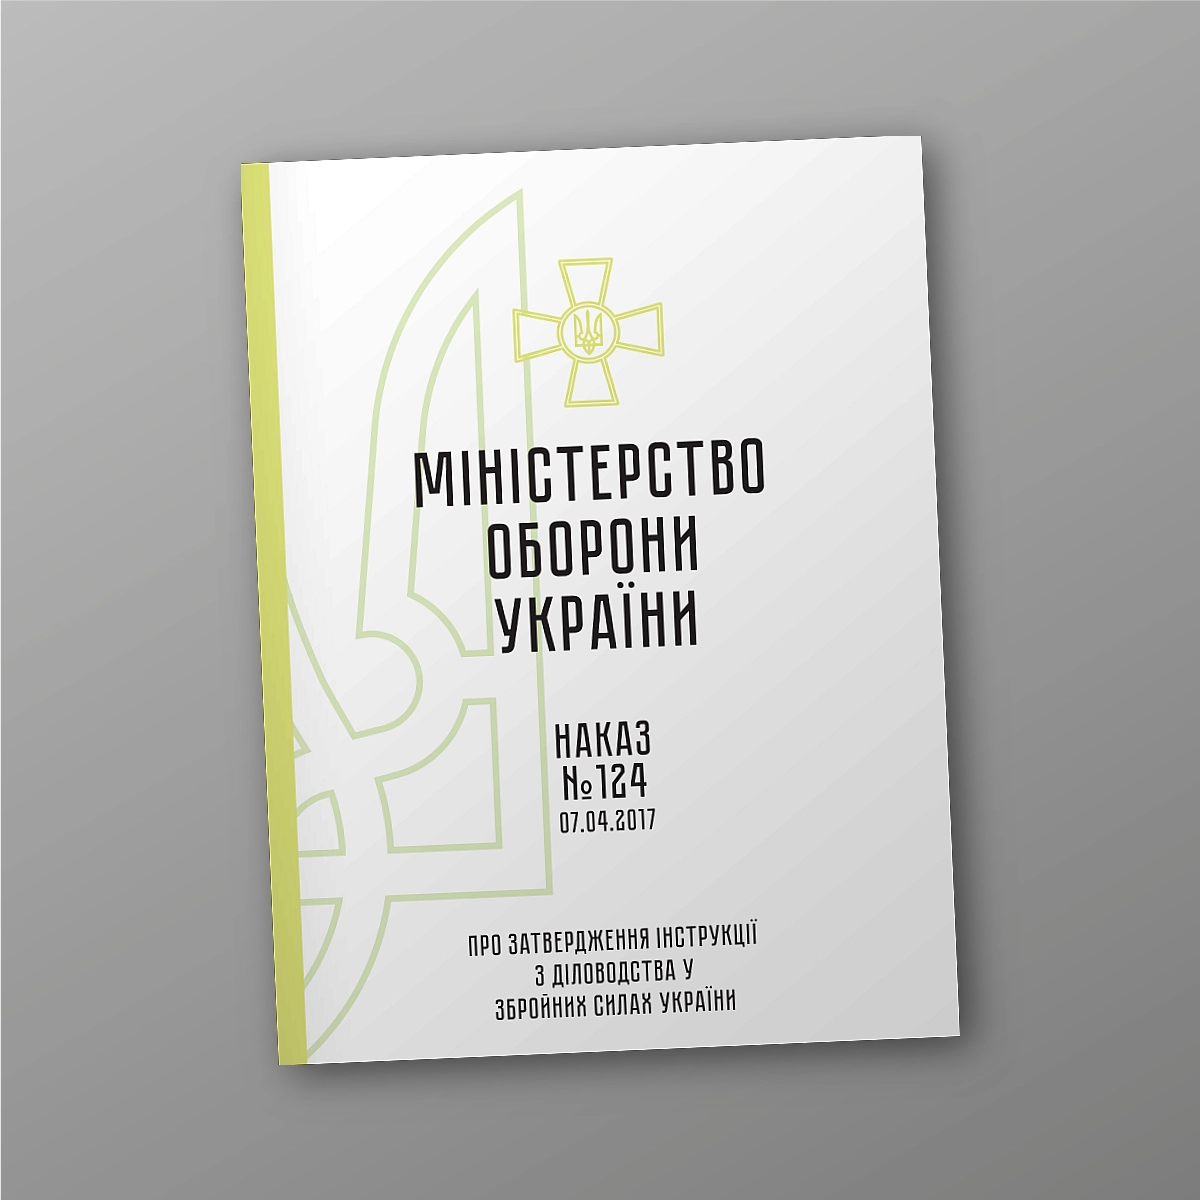 Order 124 + Appendices. On the approval of the Instructions on record keeping in the Armed Forces of Ukraine | PrintTo: